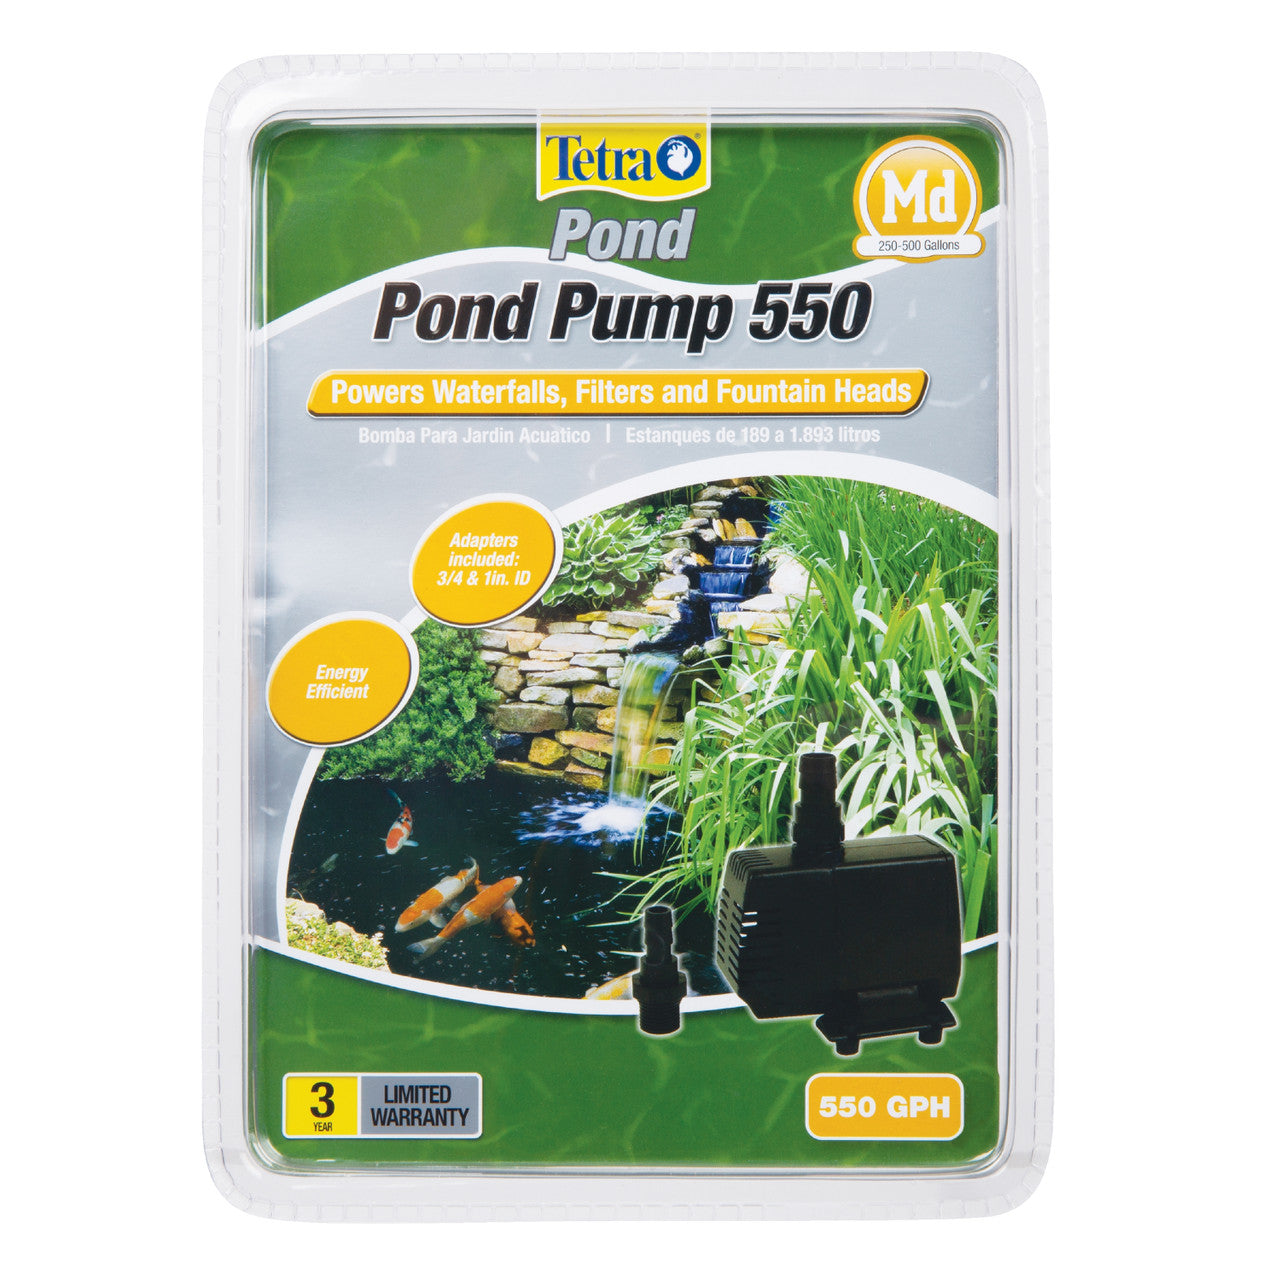 Tetra Water Garden Pump 550 for Waterfalls, Filters, and Fountain Heads Black 550 GPH